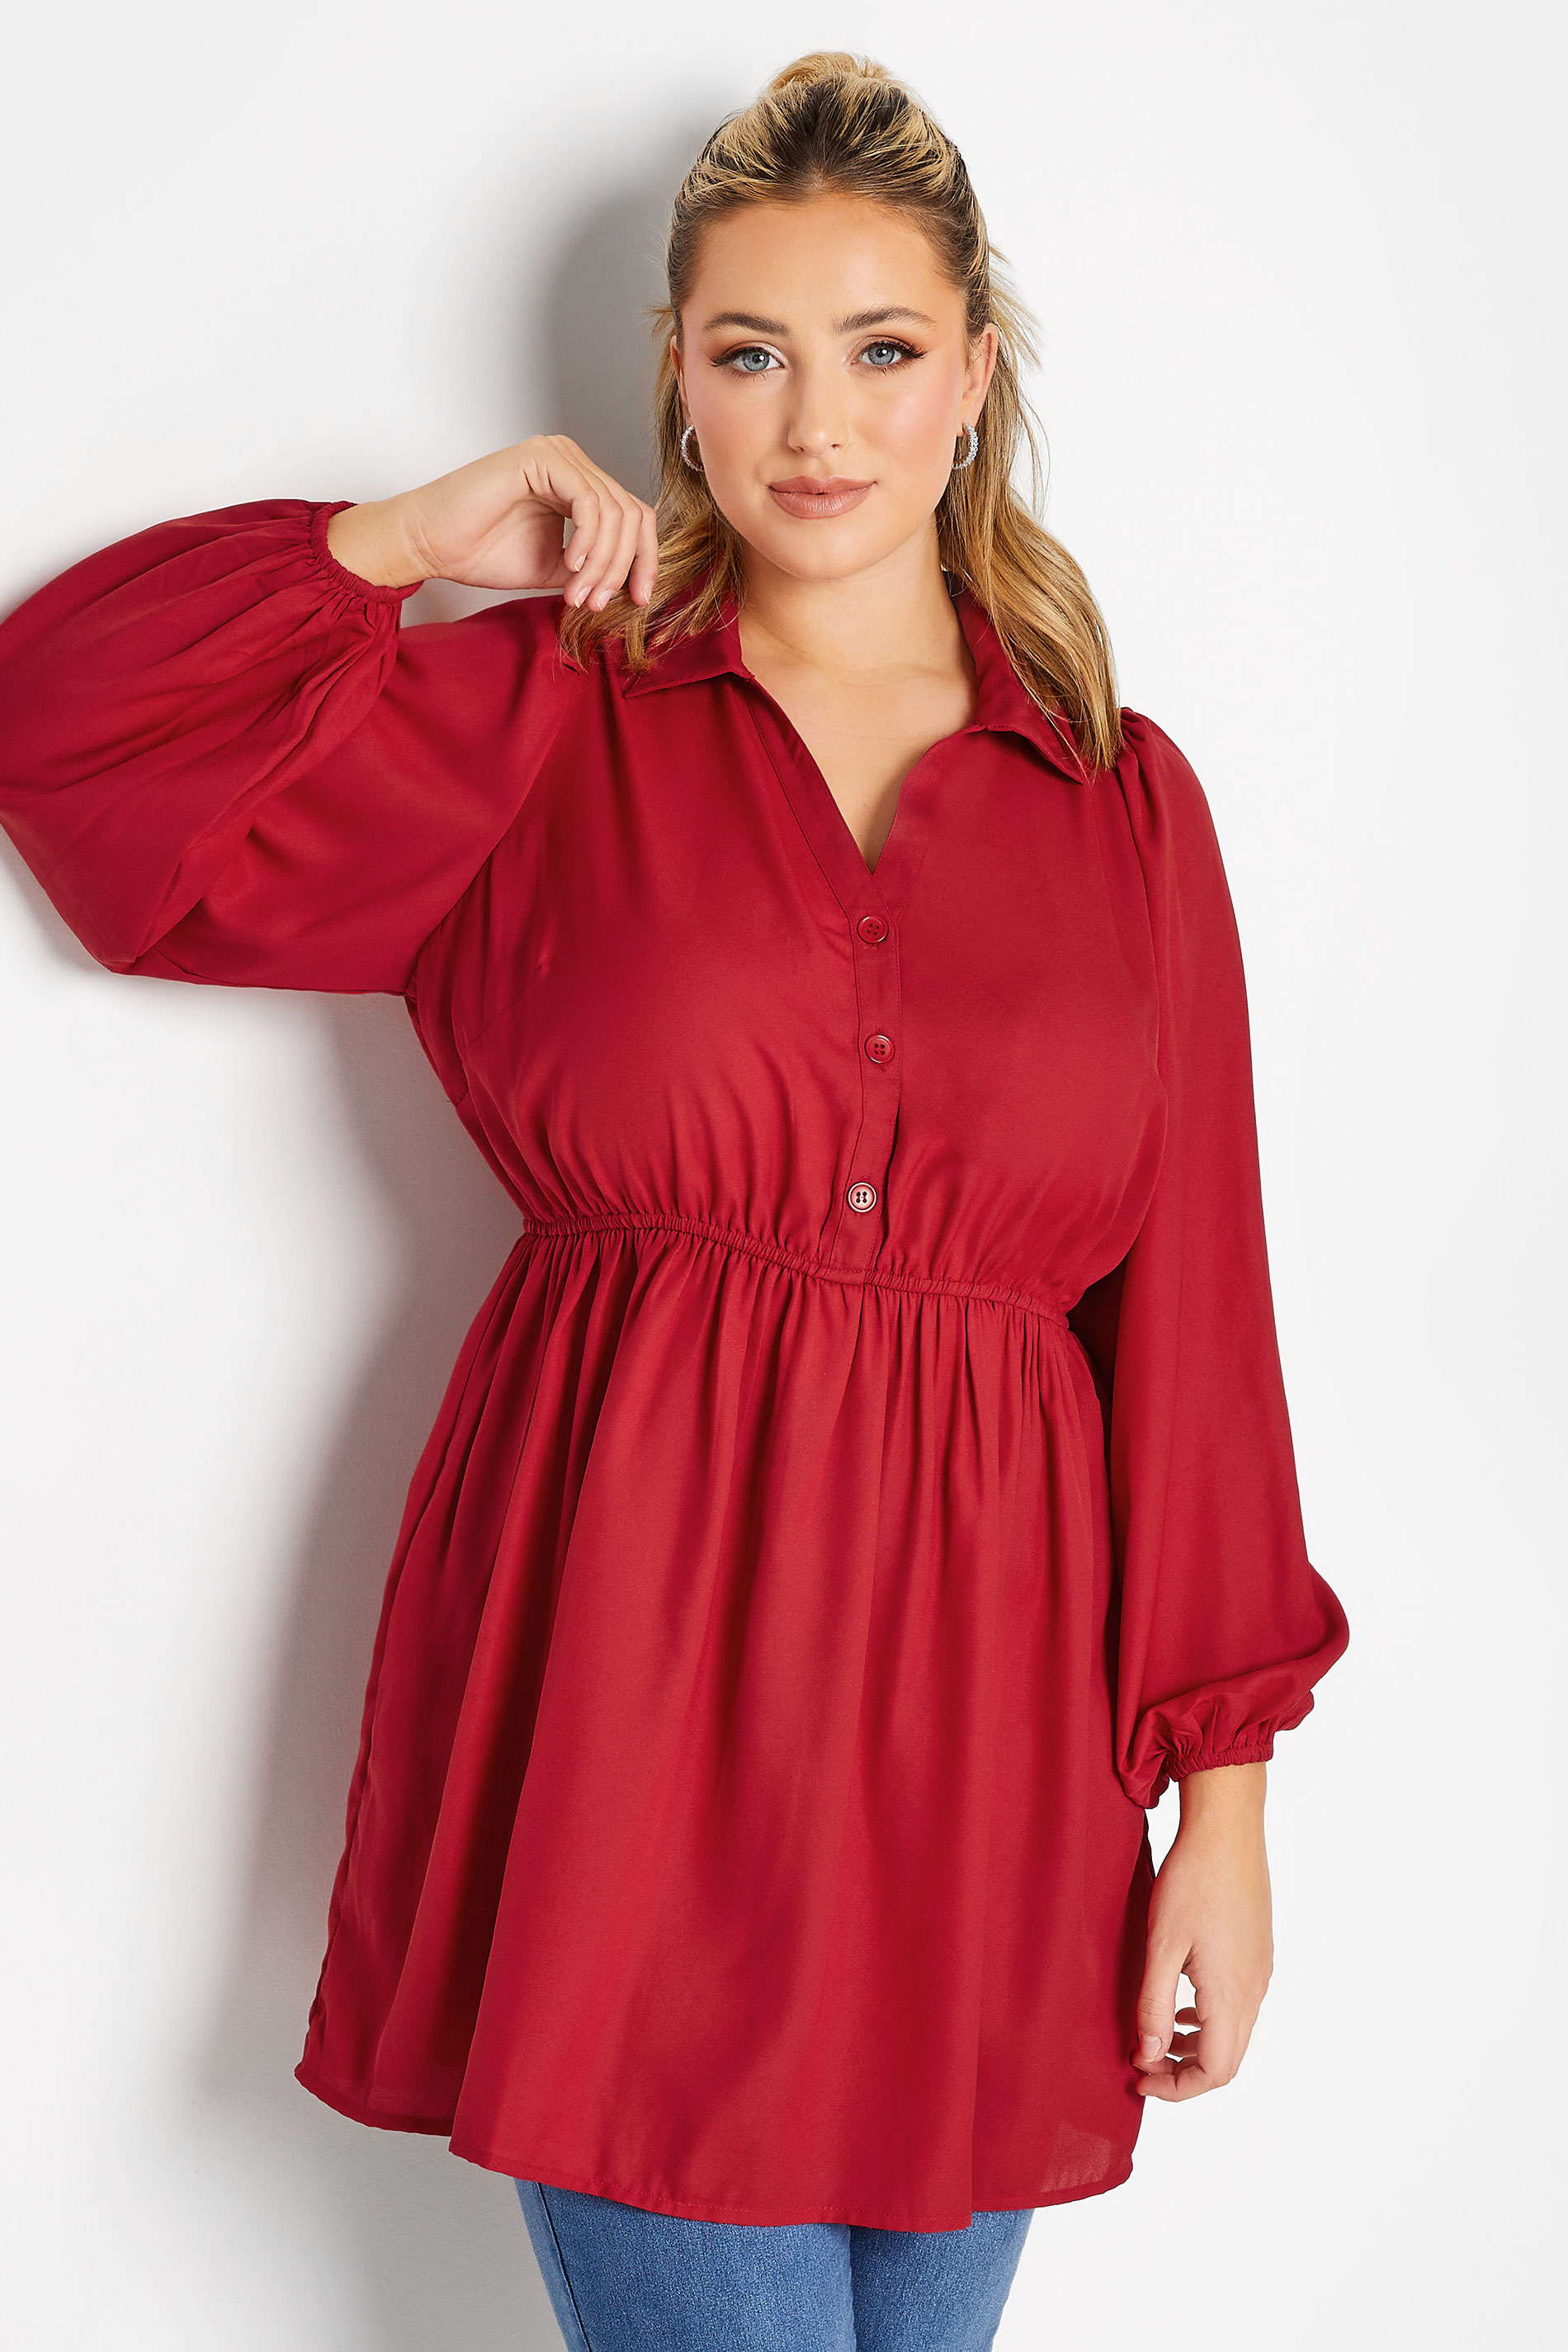 LIMITED COLLECTION Plus Size Red Peplum Blouse | Yours Clothings 1